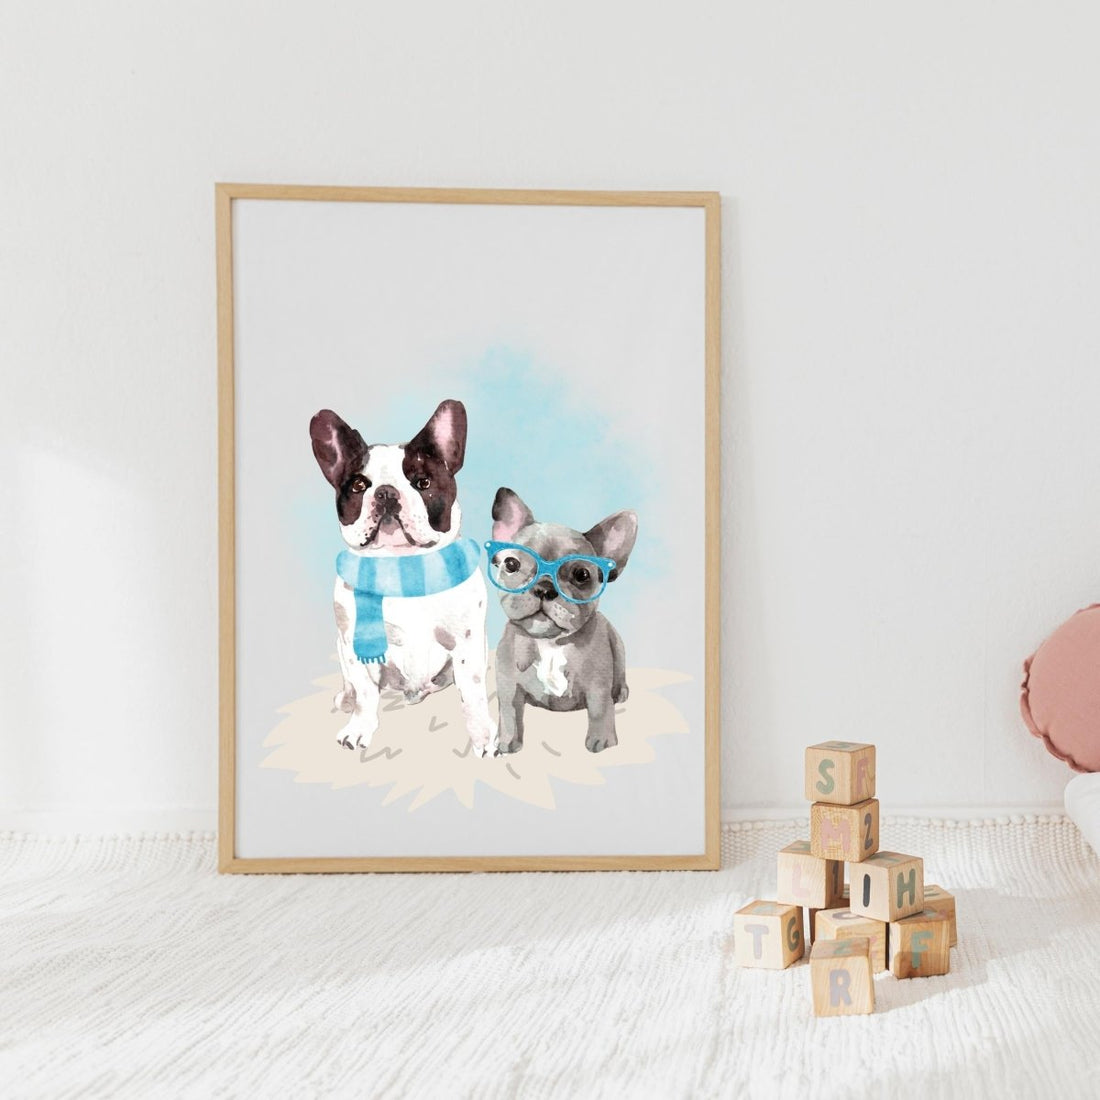 We Opened an Etsy Store. Come take a look! - DoggyLoveandMore